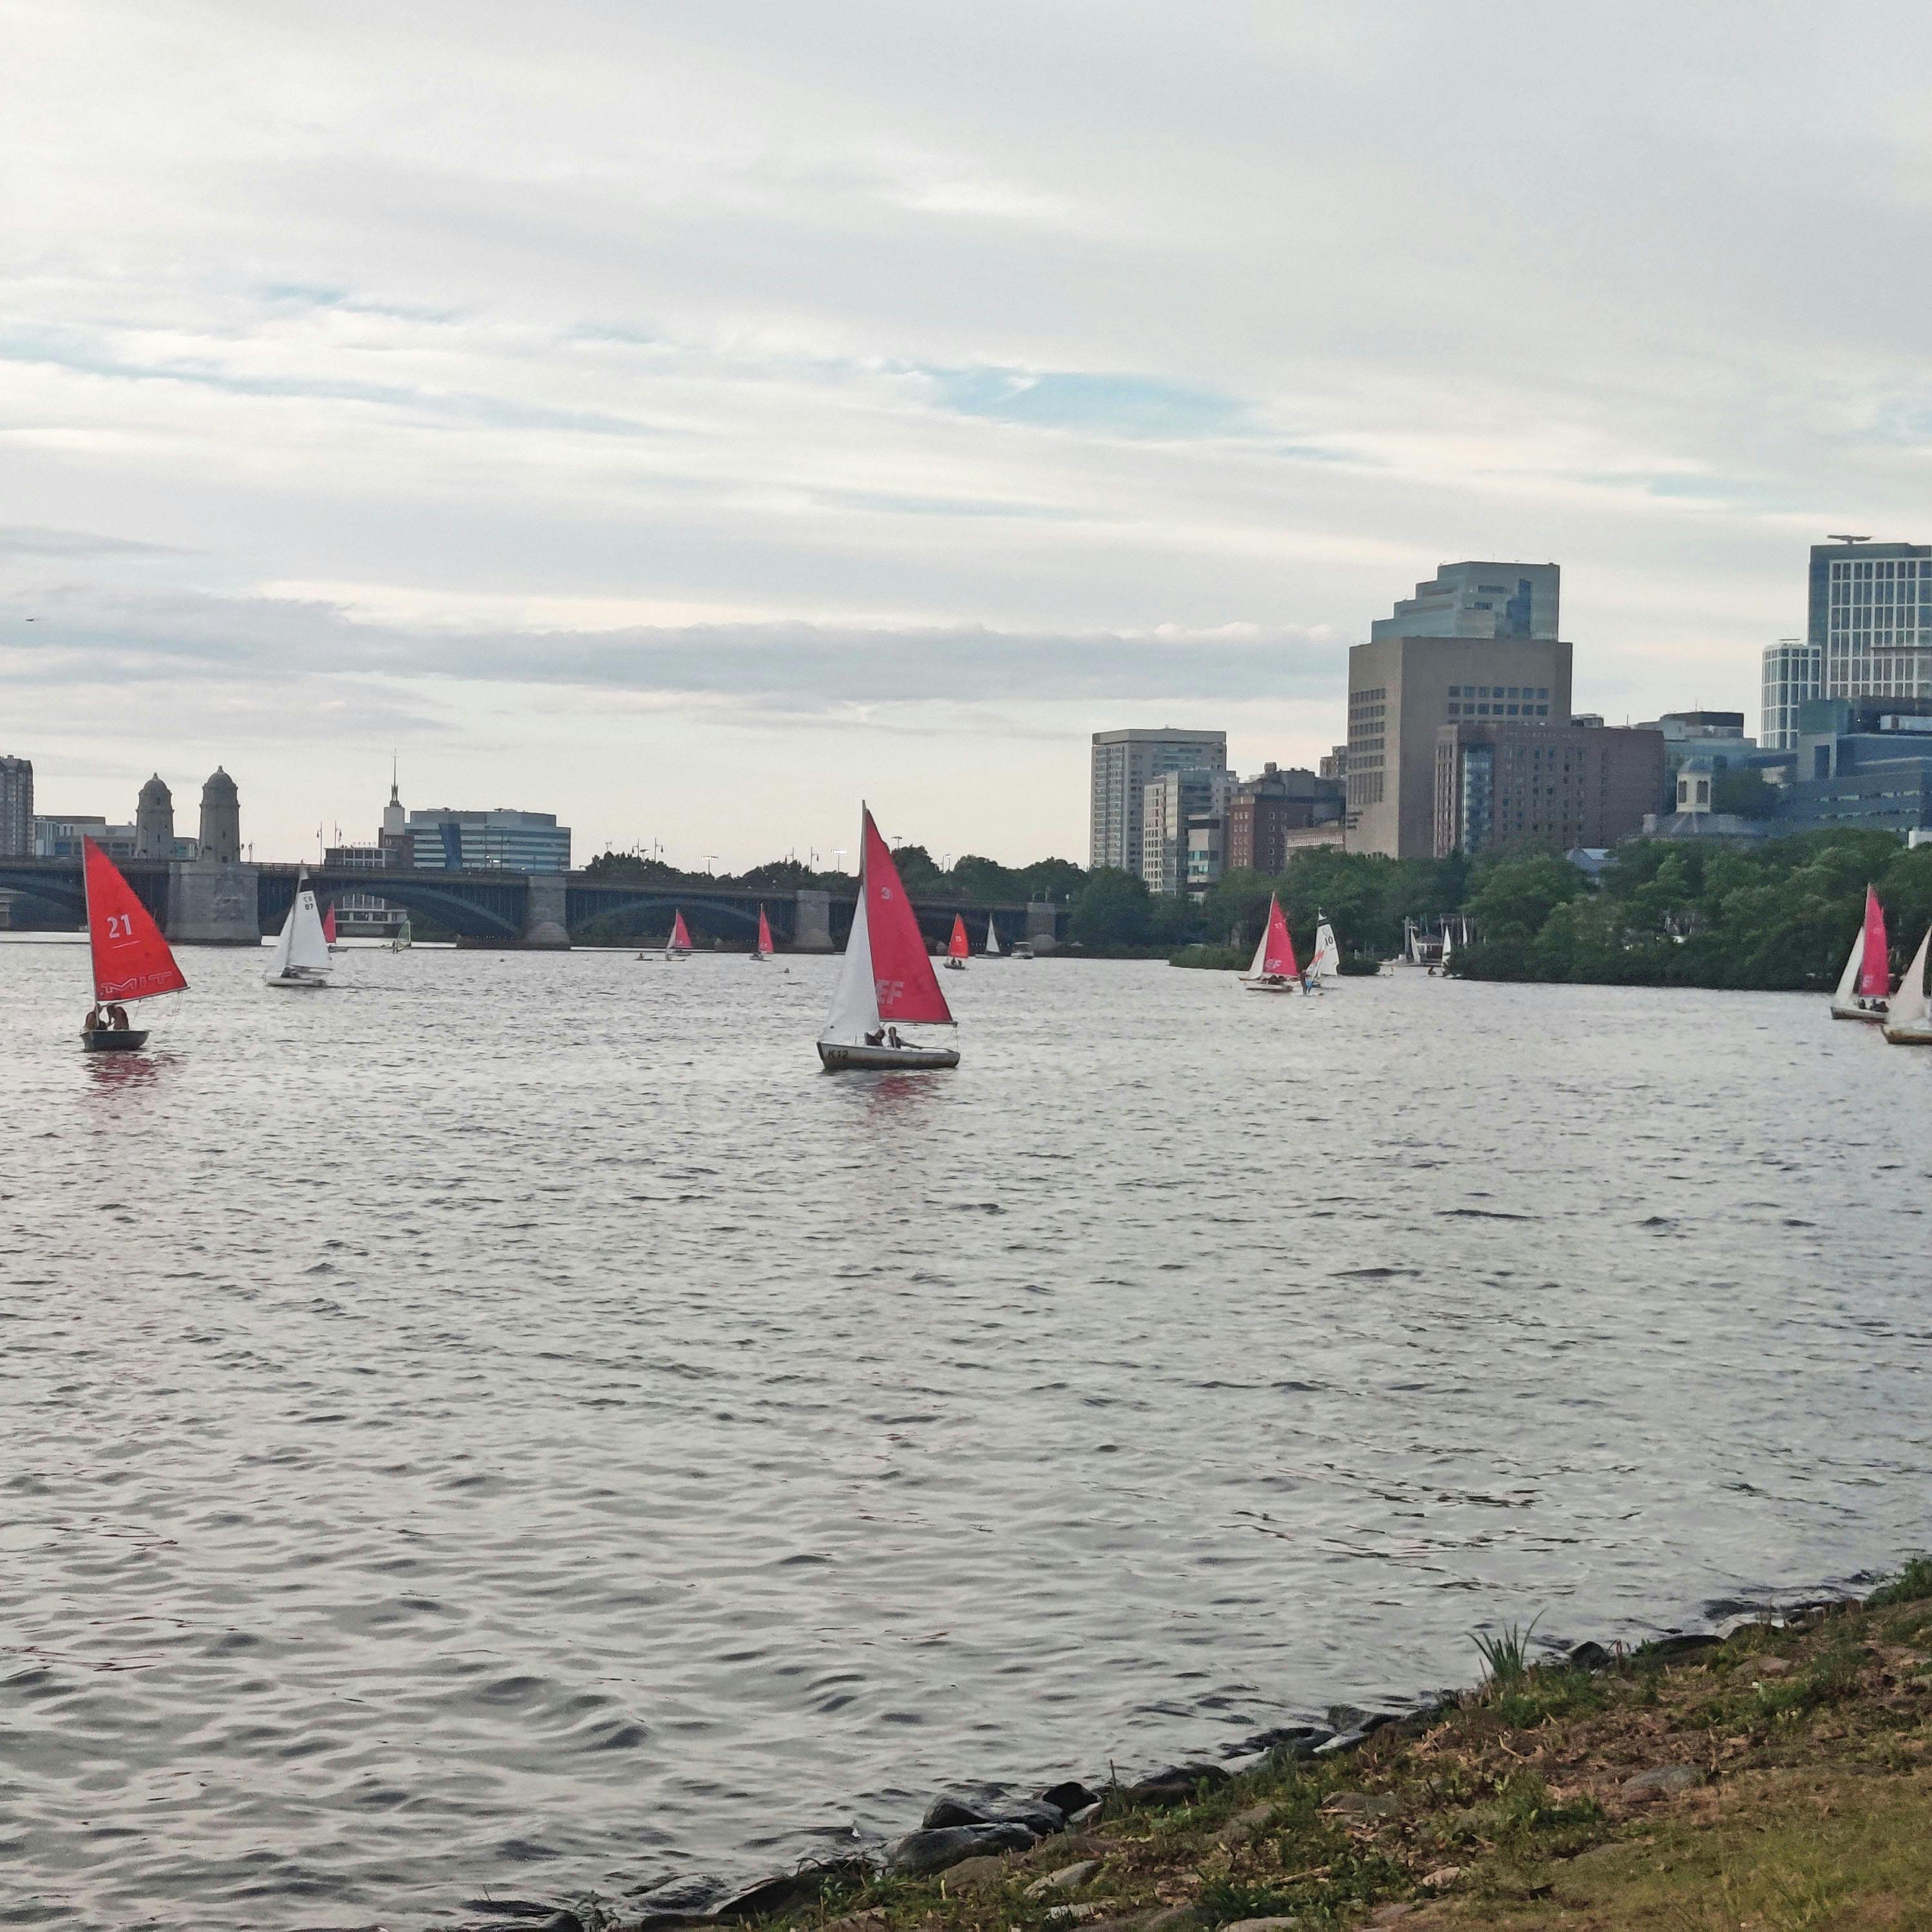 more sailboats in the charles, this time taken from ground level